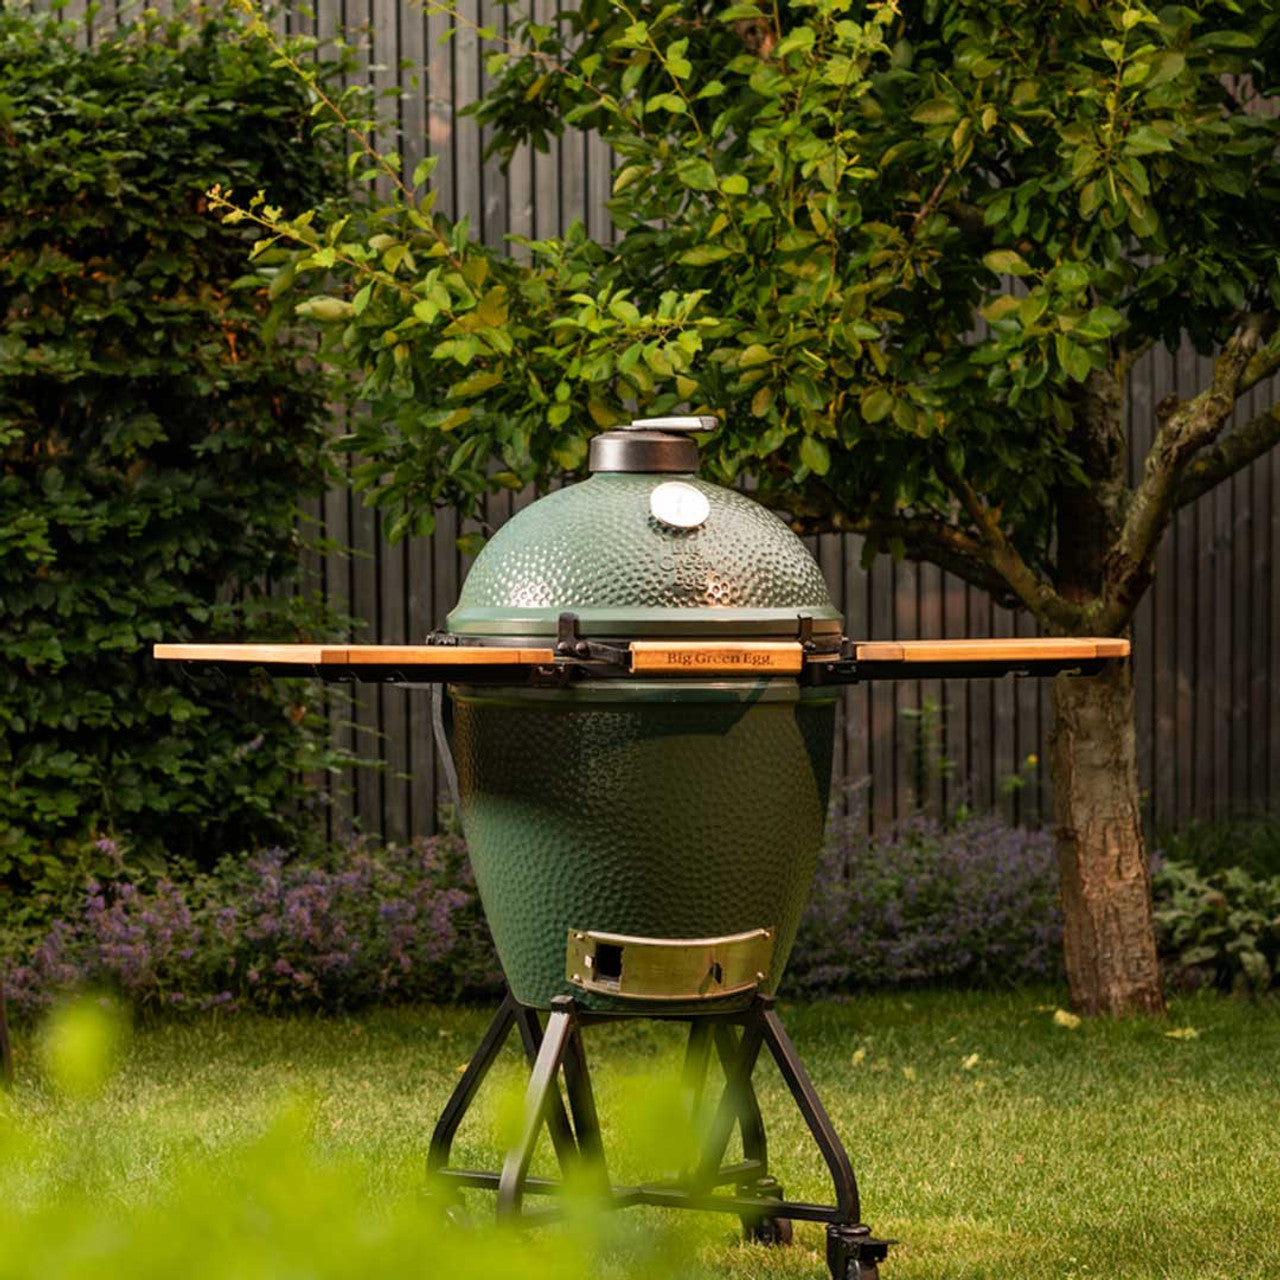 Summer Grilling Giveaway Rules